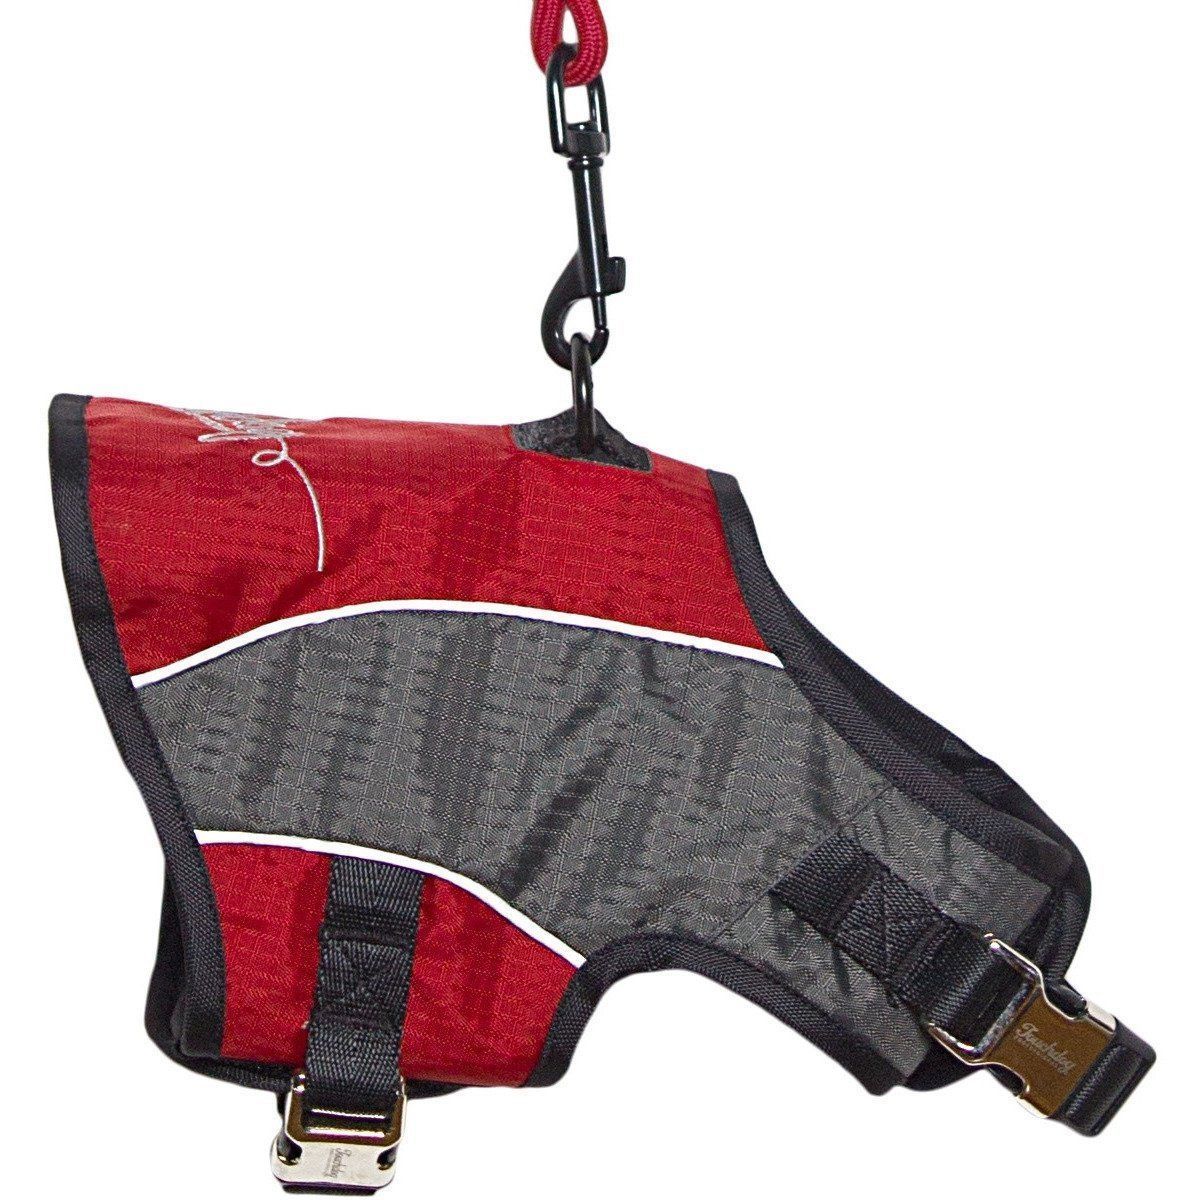 Touchdog ® 'Reflective-Max' 2-in-1 Performance Dog Harness and Leash  